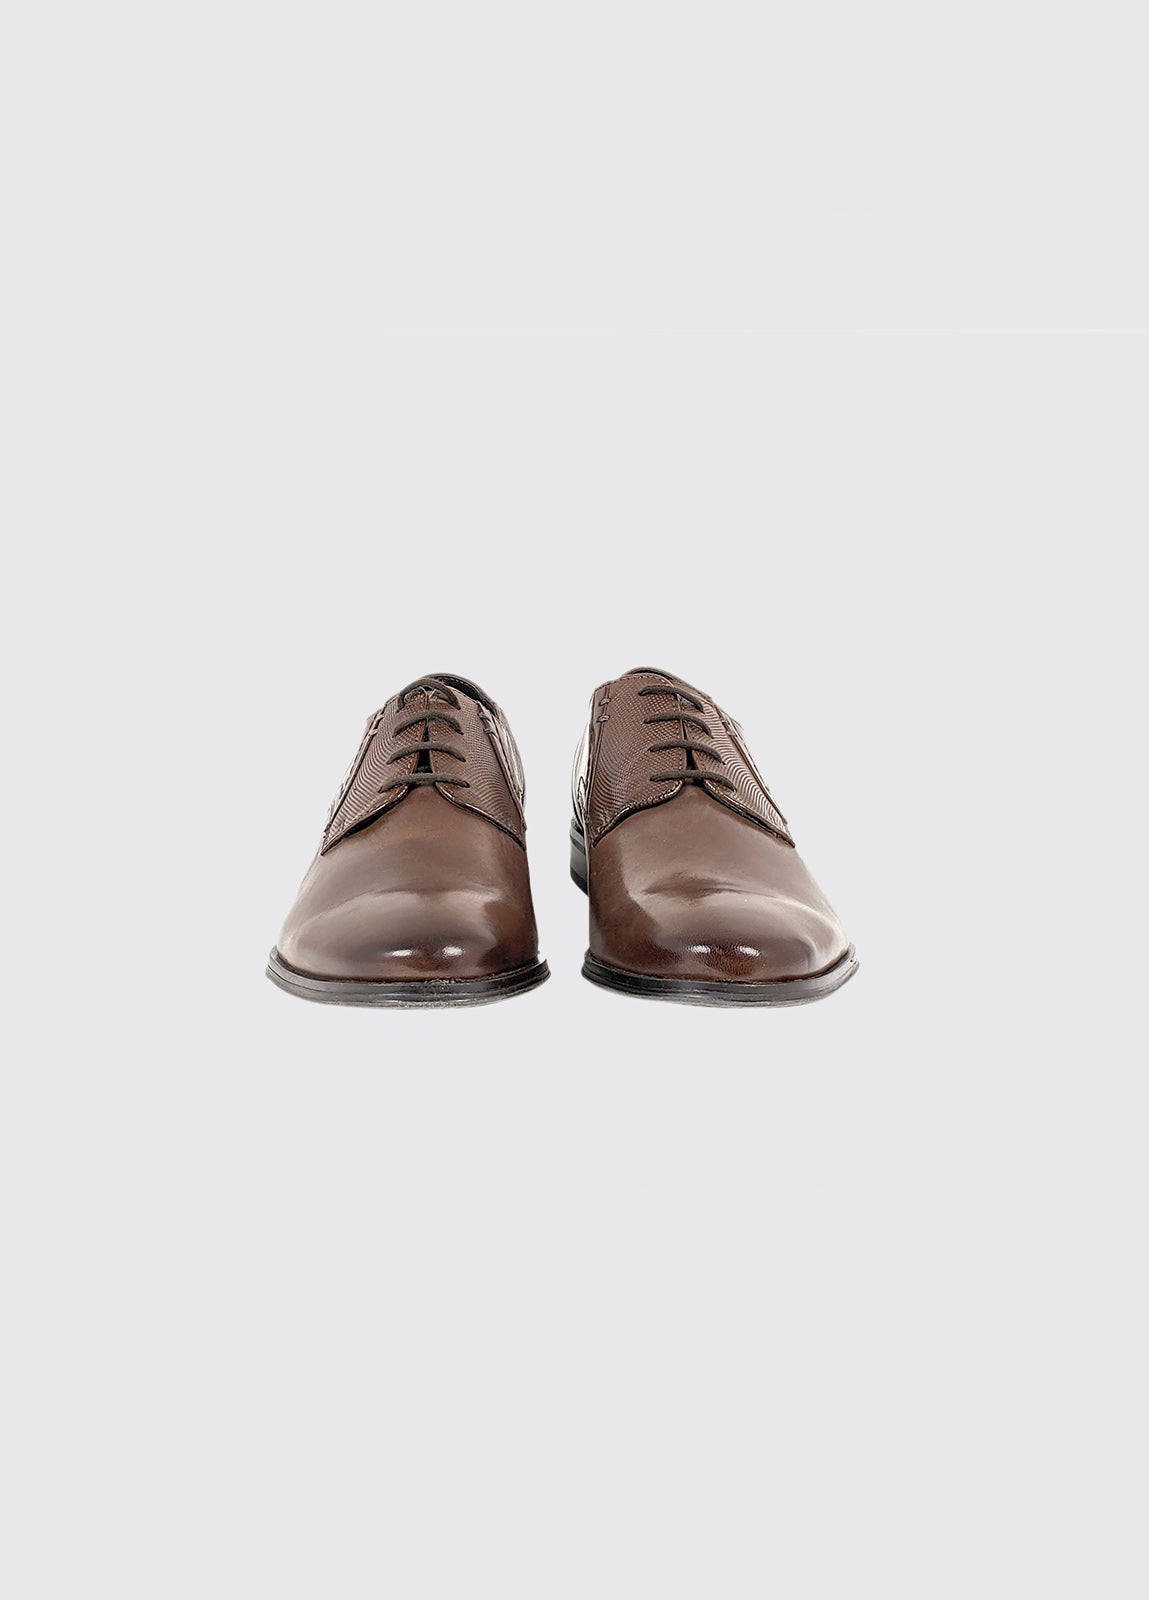 Drago Brown Lace up leather Shoe-Front view